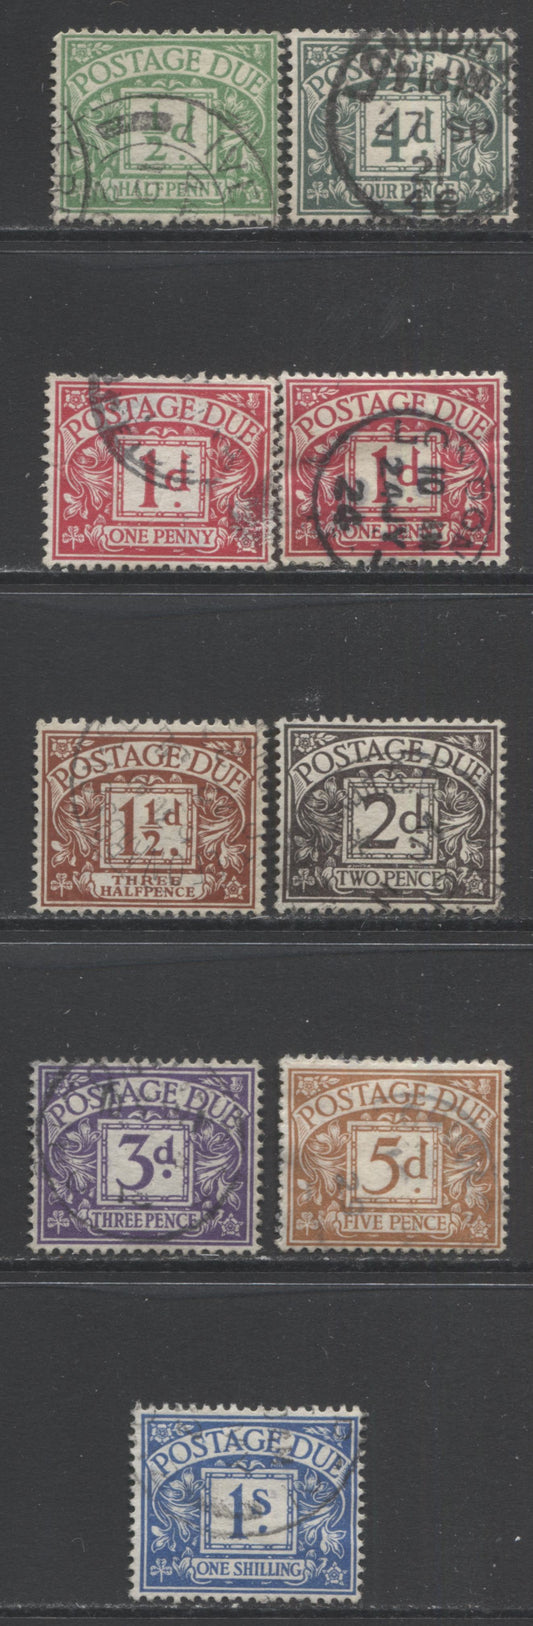 Lot 89 Great Britain SC#J1-J8 1914-1922 Postage Dues With Royal Cypher Watermark, A F/VF Used Range Of Singles, 2017 Scott Cat. $37.55 USD, Click on Listing to See ALL Pictures